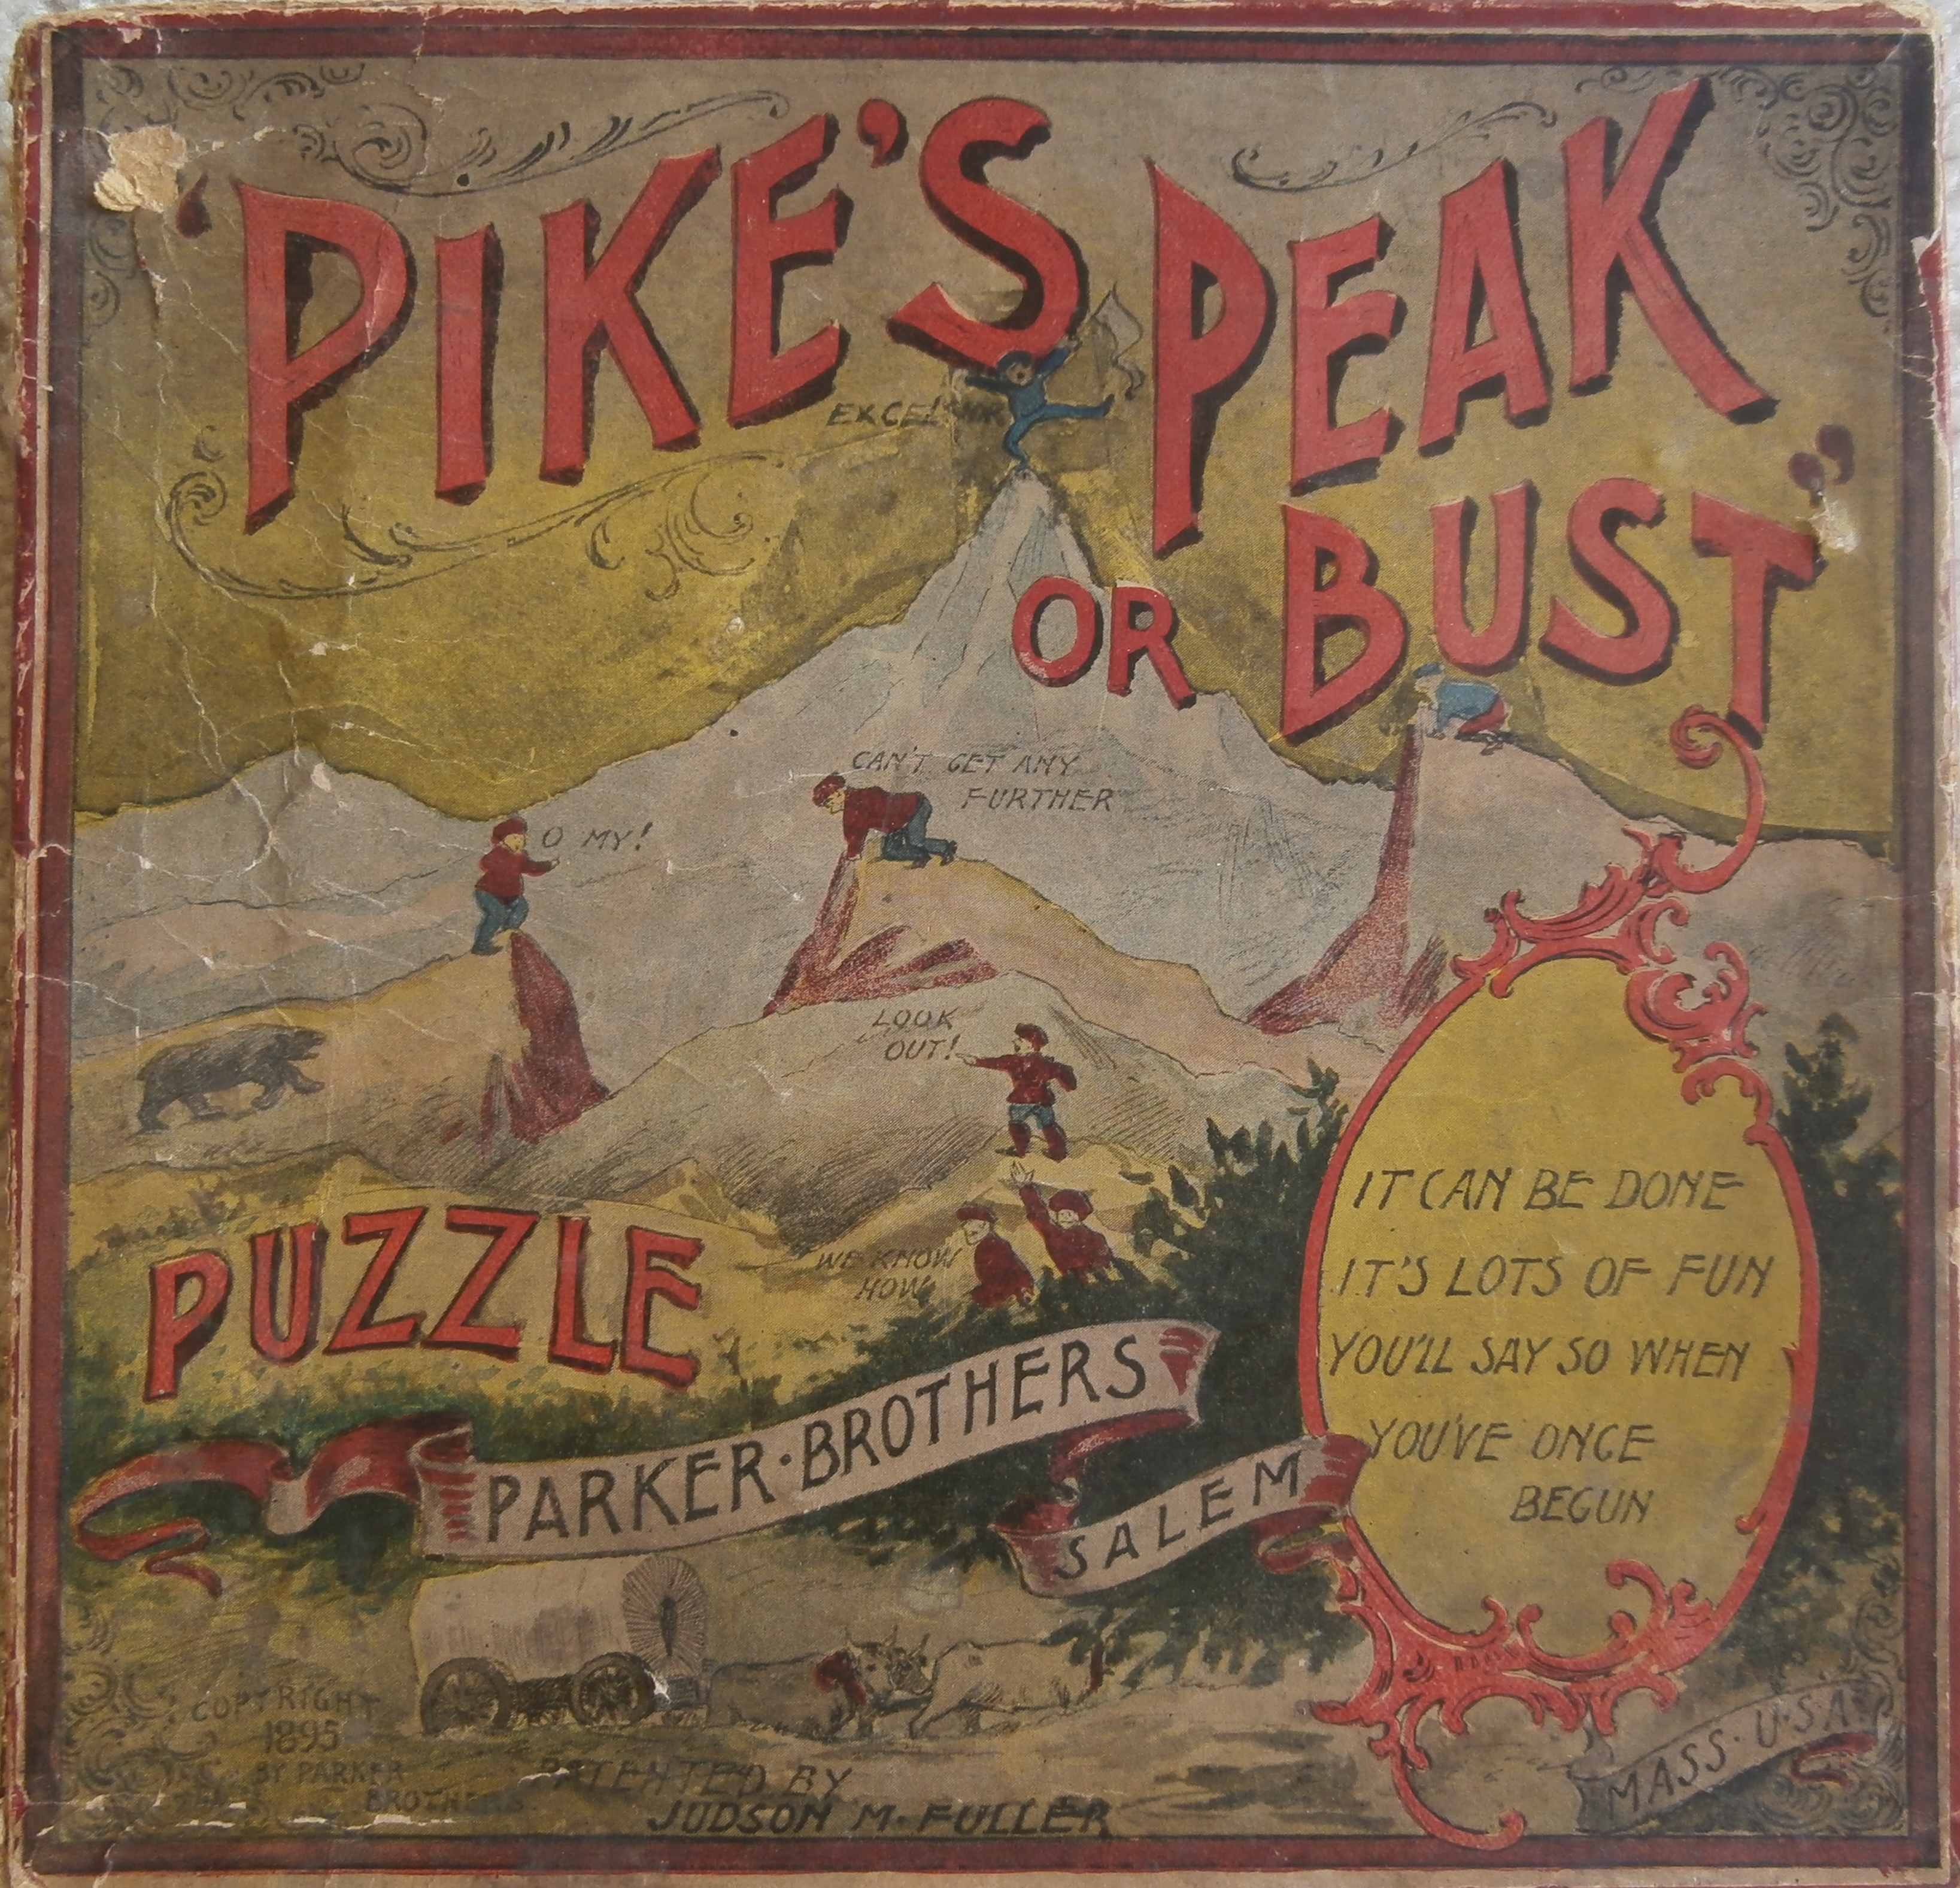 Pike’s Peak or Bust: 1895 Old Parker Brothers Game